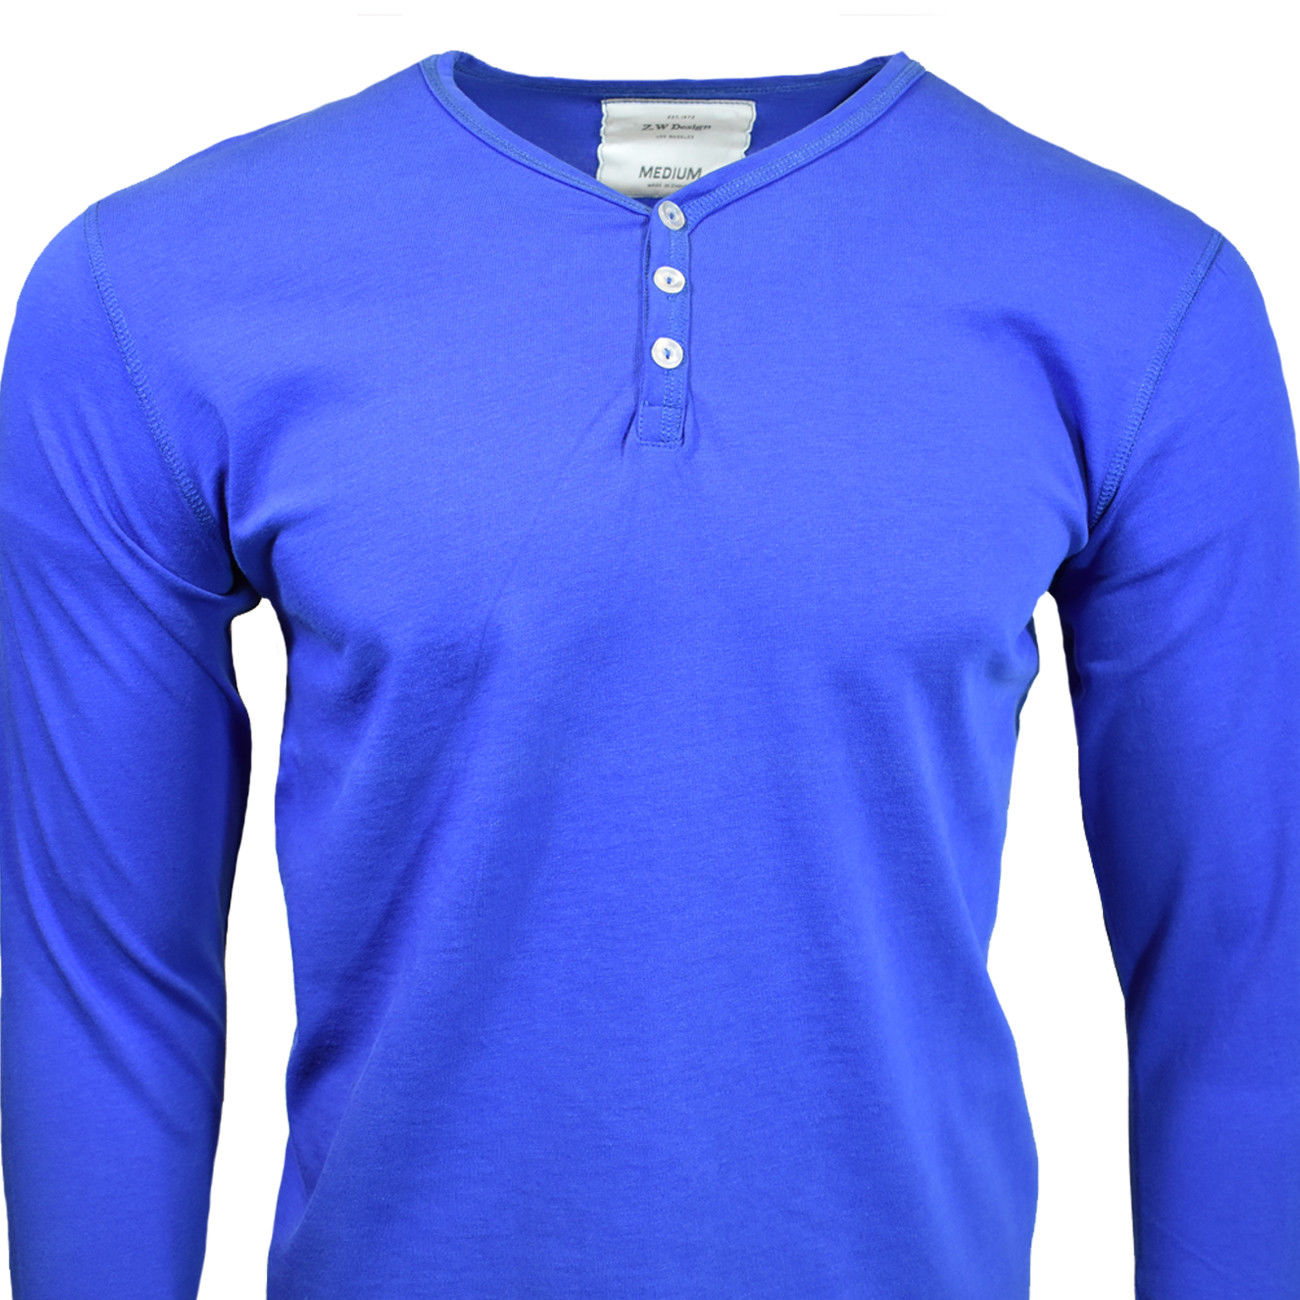 Henley Shirt Mens Long Sleeve Button Thermal Slim Fit Pullover ROYAL BLUE